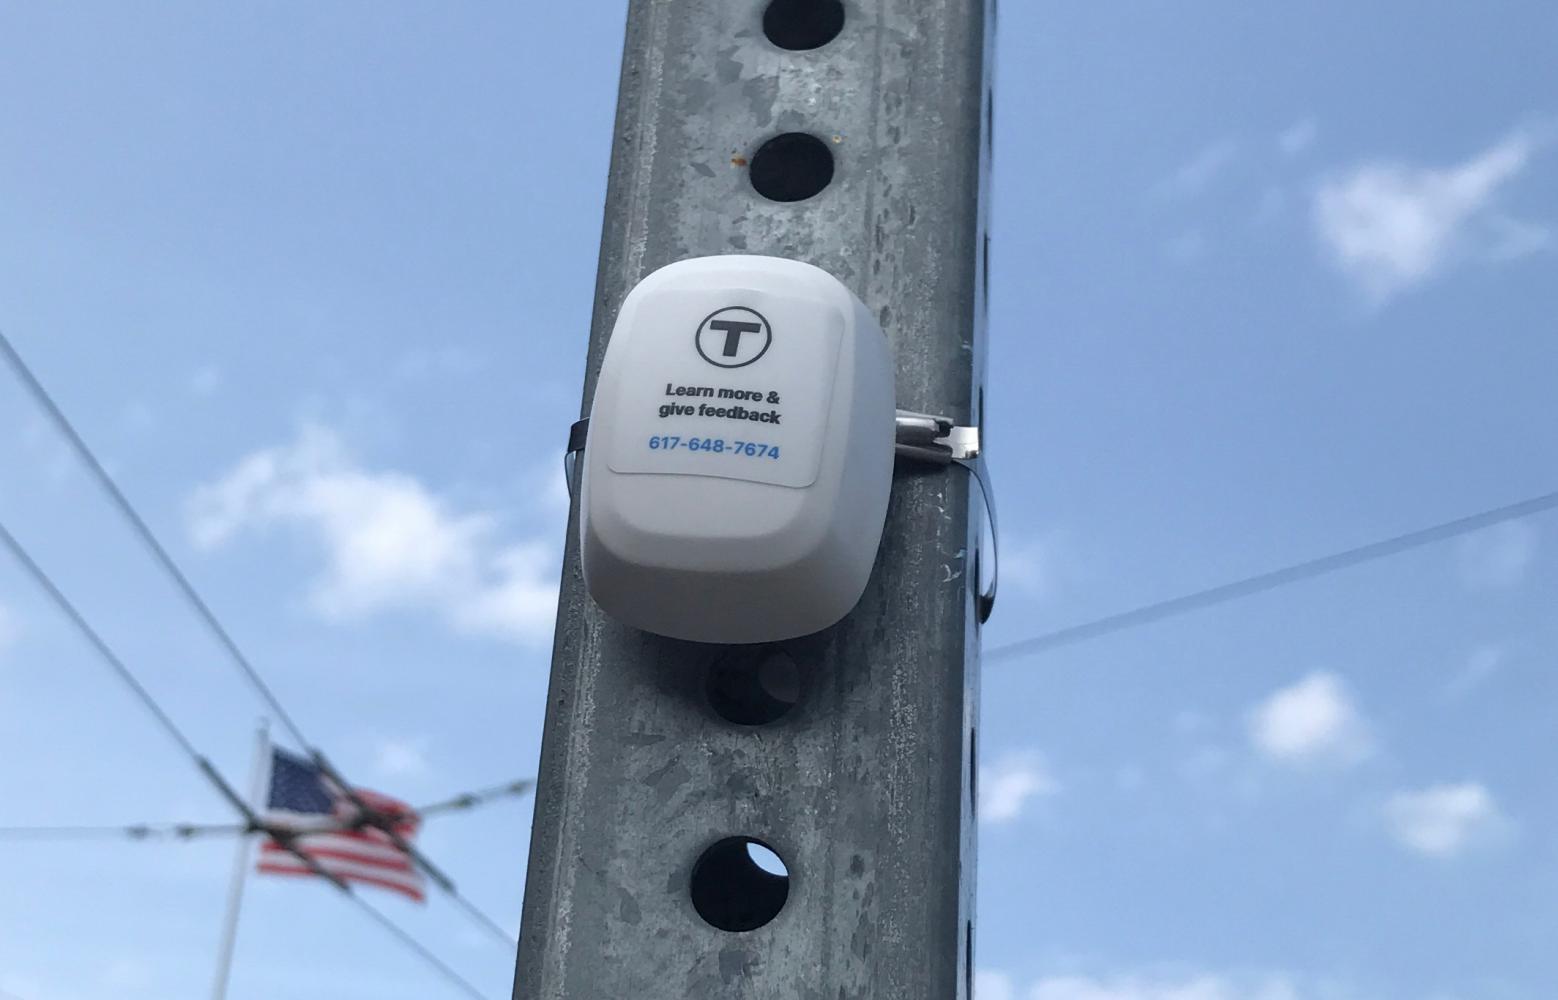 Bluetooth beacon attached to the metal post of a bus stop sign